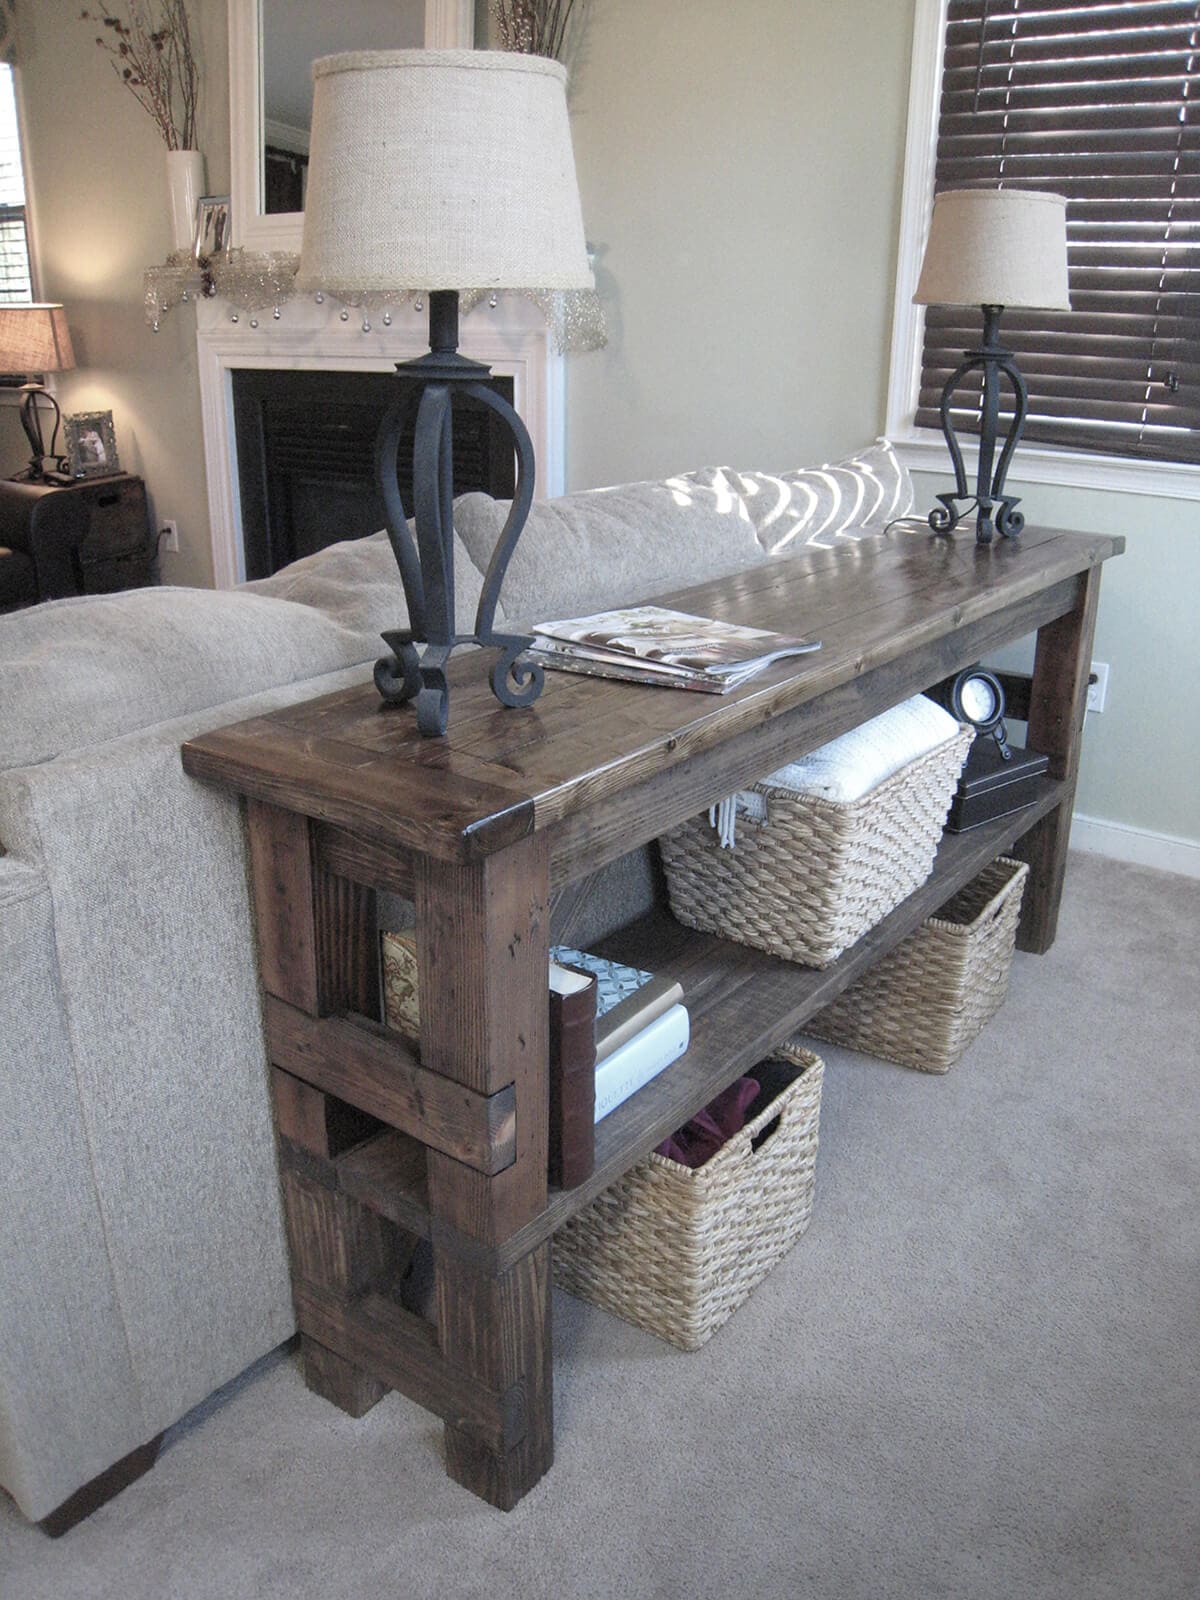 Impressive coffee table ideas to add style to your home - 83